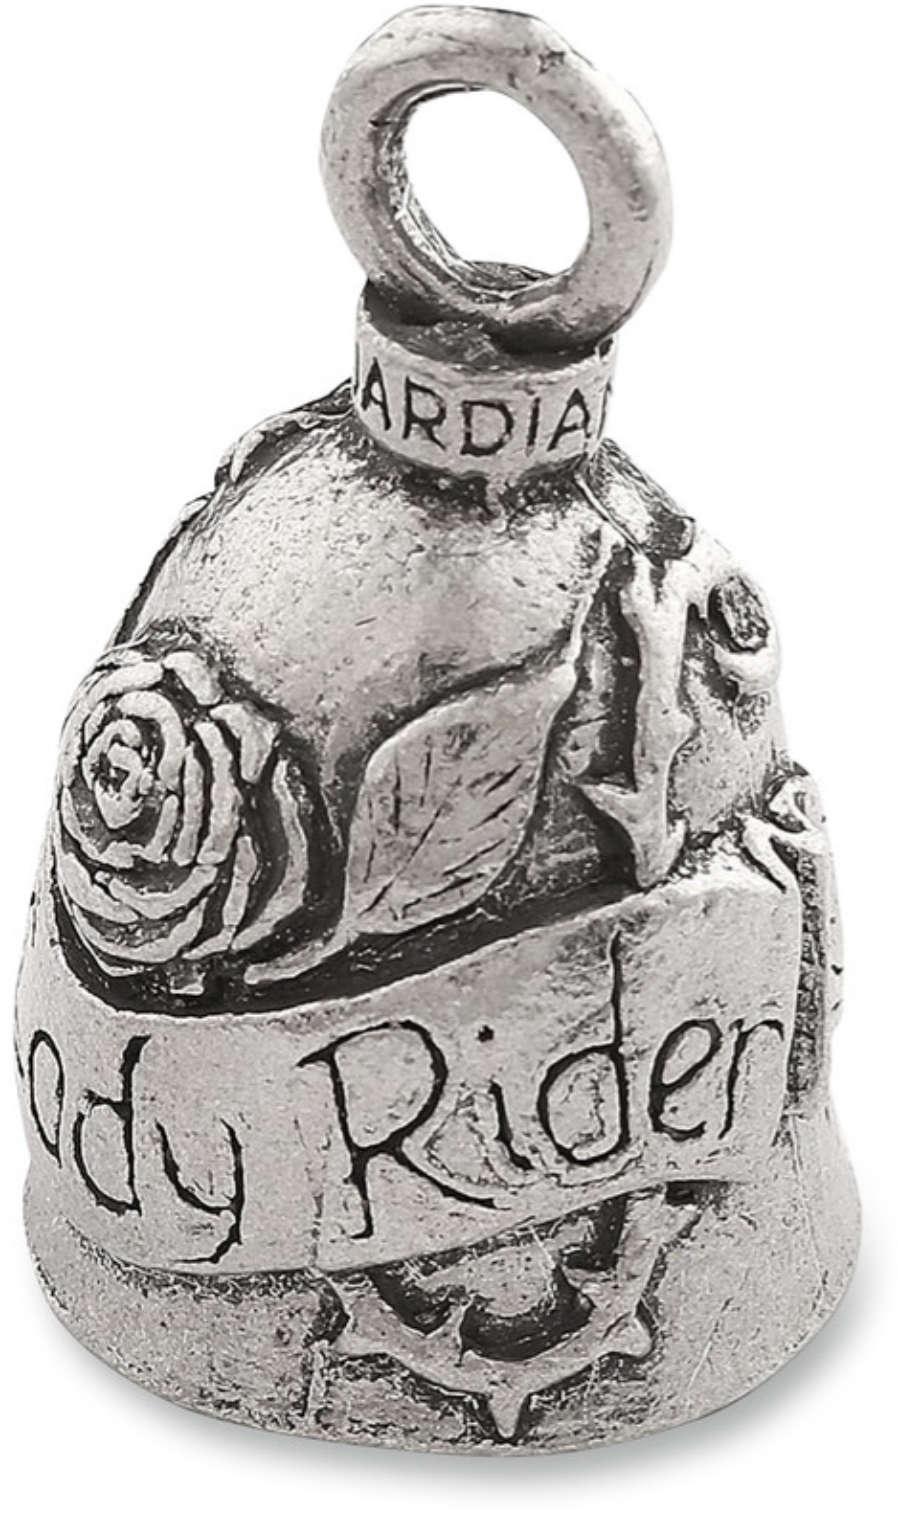 Guardian Bell - Lady Rider